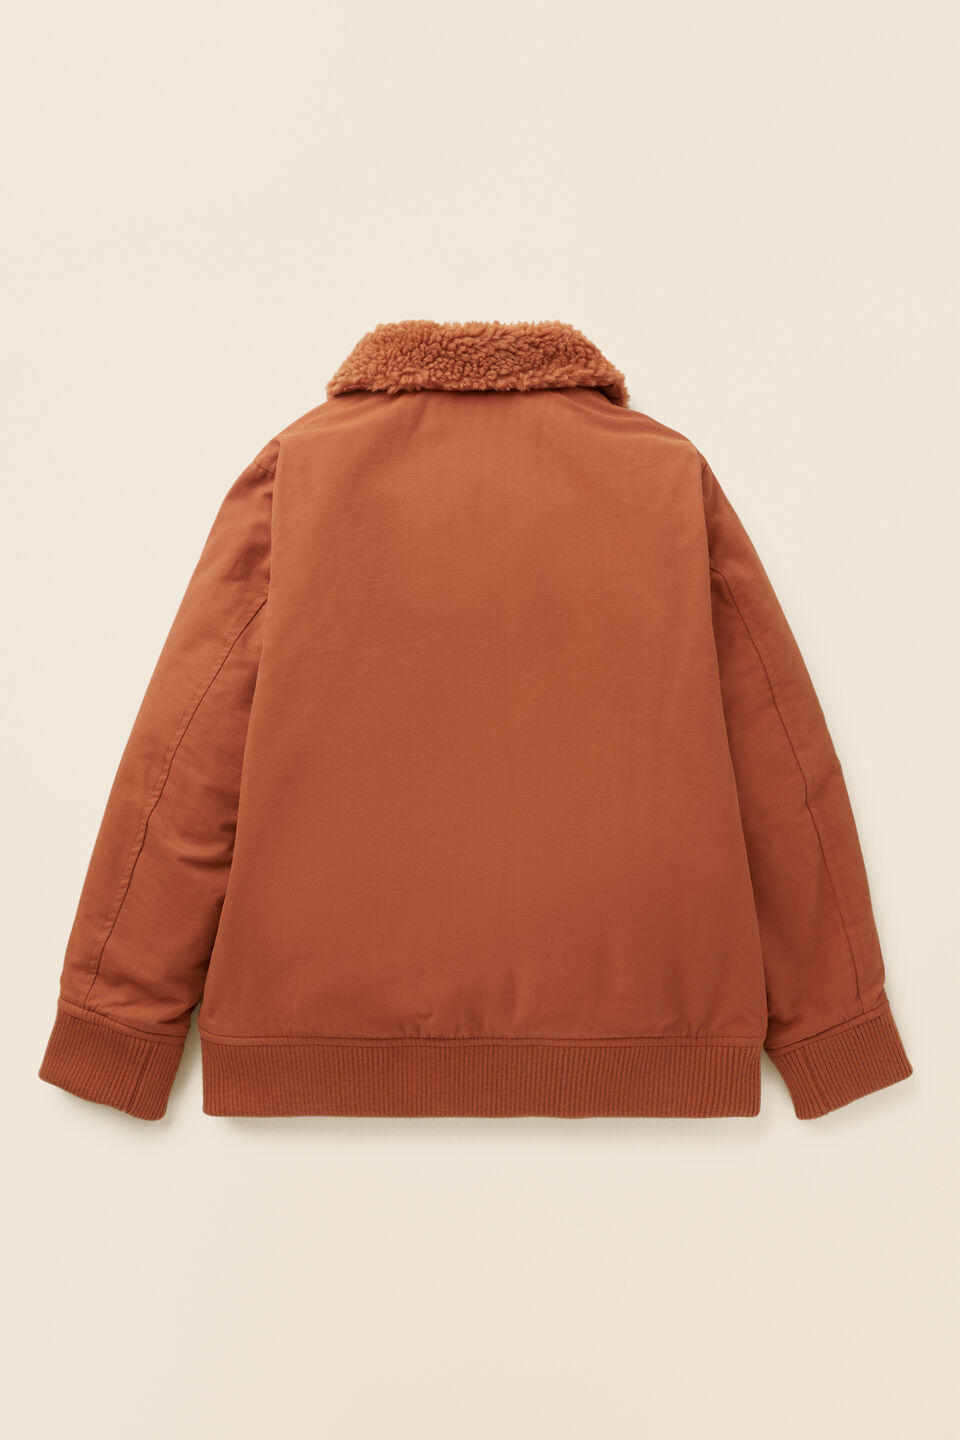 Patched Bomber Jacket  Rust Brown